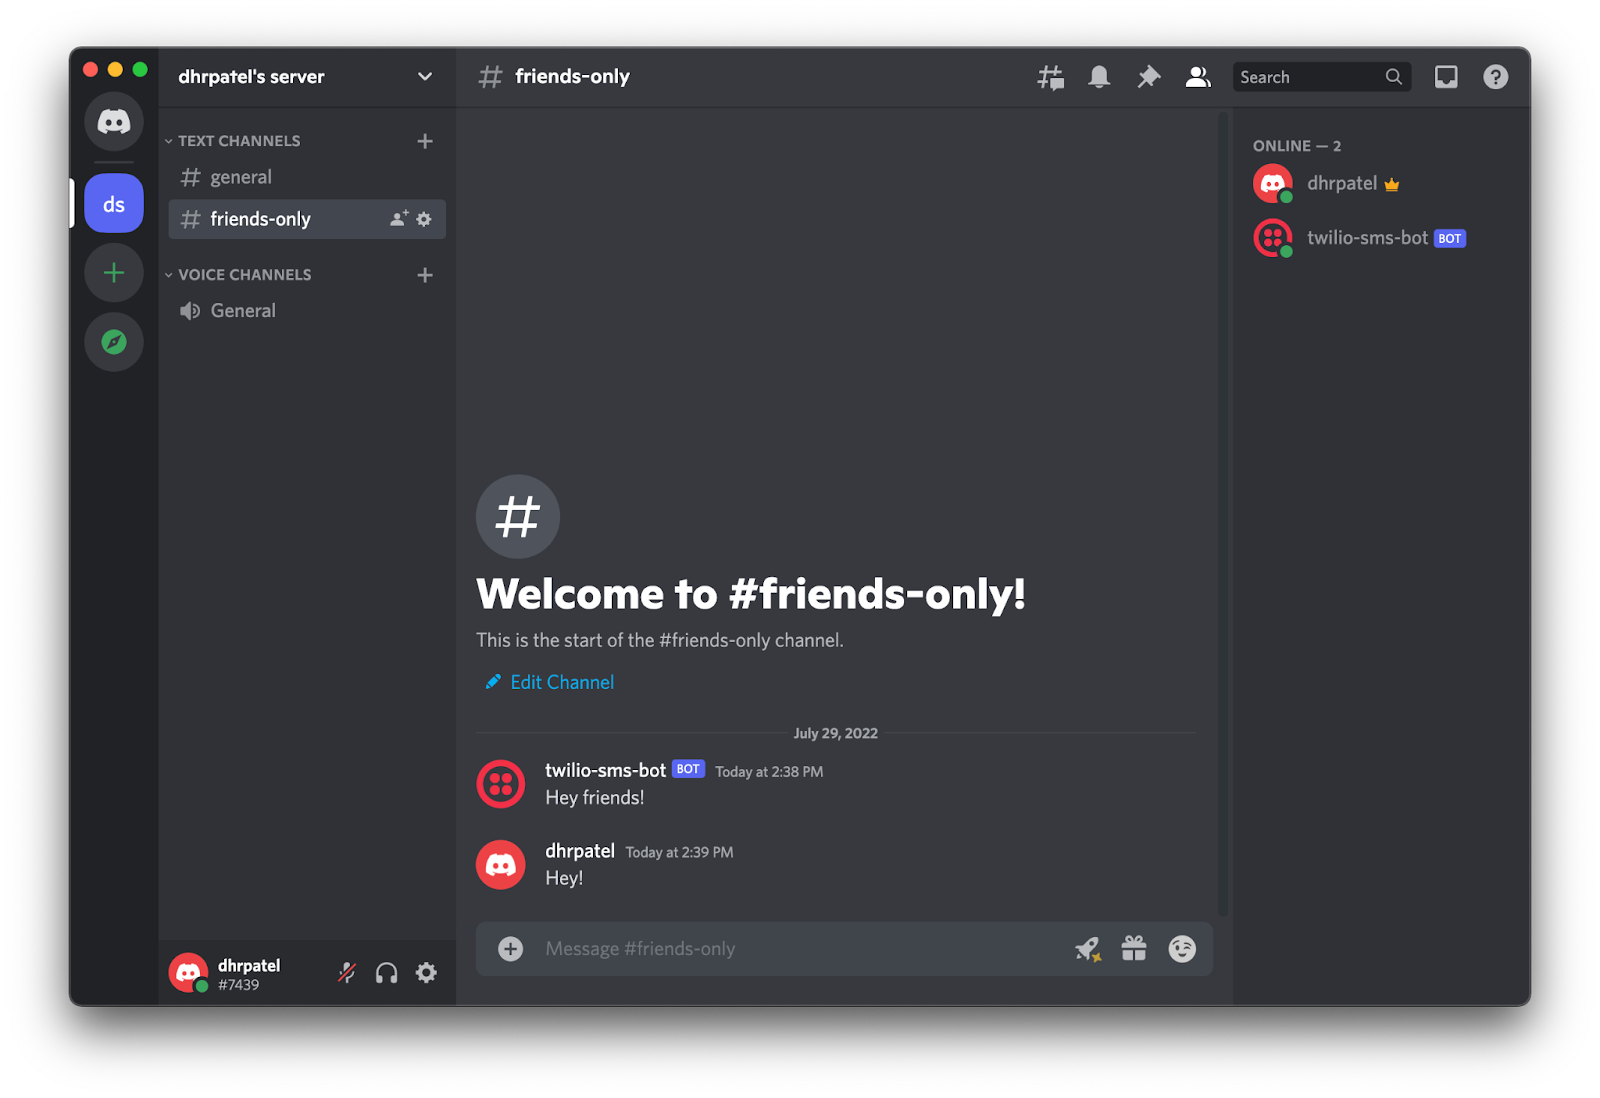 Friends-only channel in discord client showing a message from twilio-sms-bot that says "Hey Friends!" and another message being sent by a user named dhrpatel saying "Hey!".